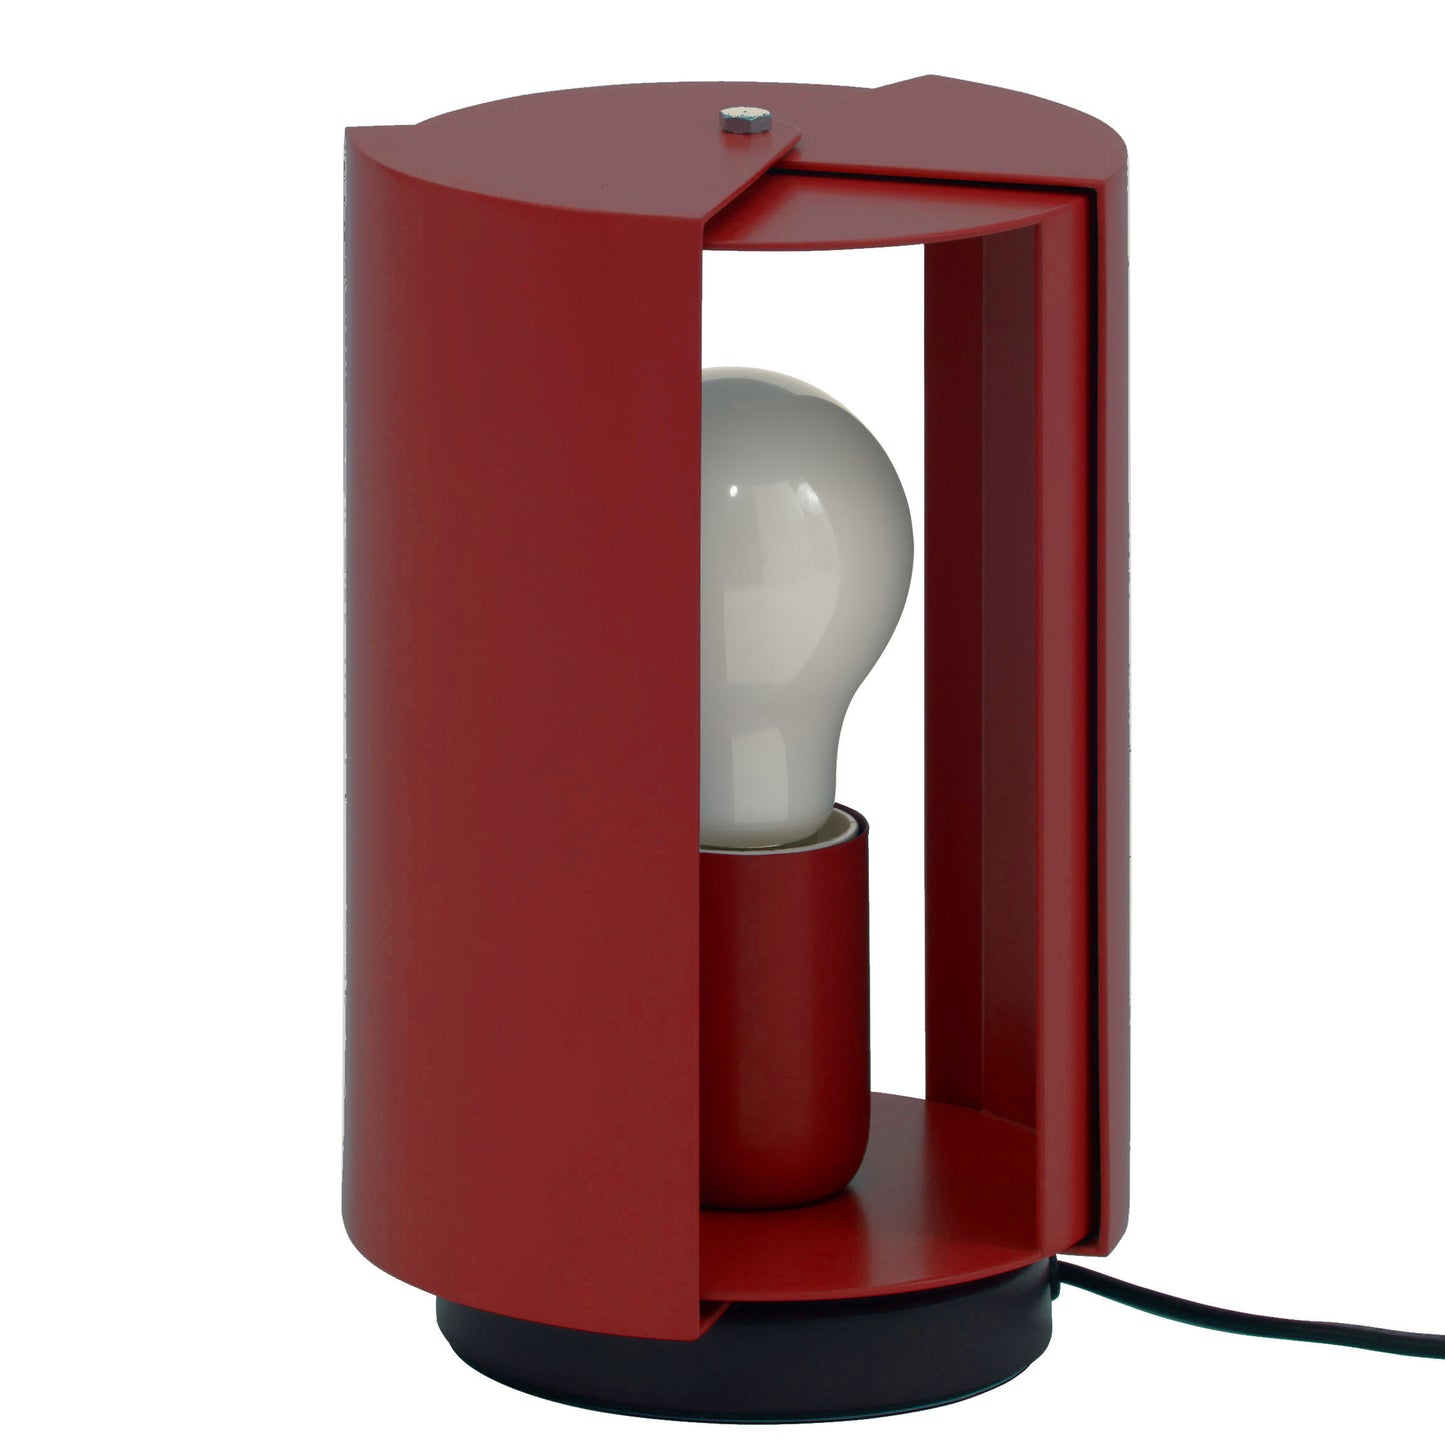 Red modern Table lamp adjustable pivotable bedroomby Nemo